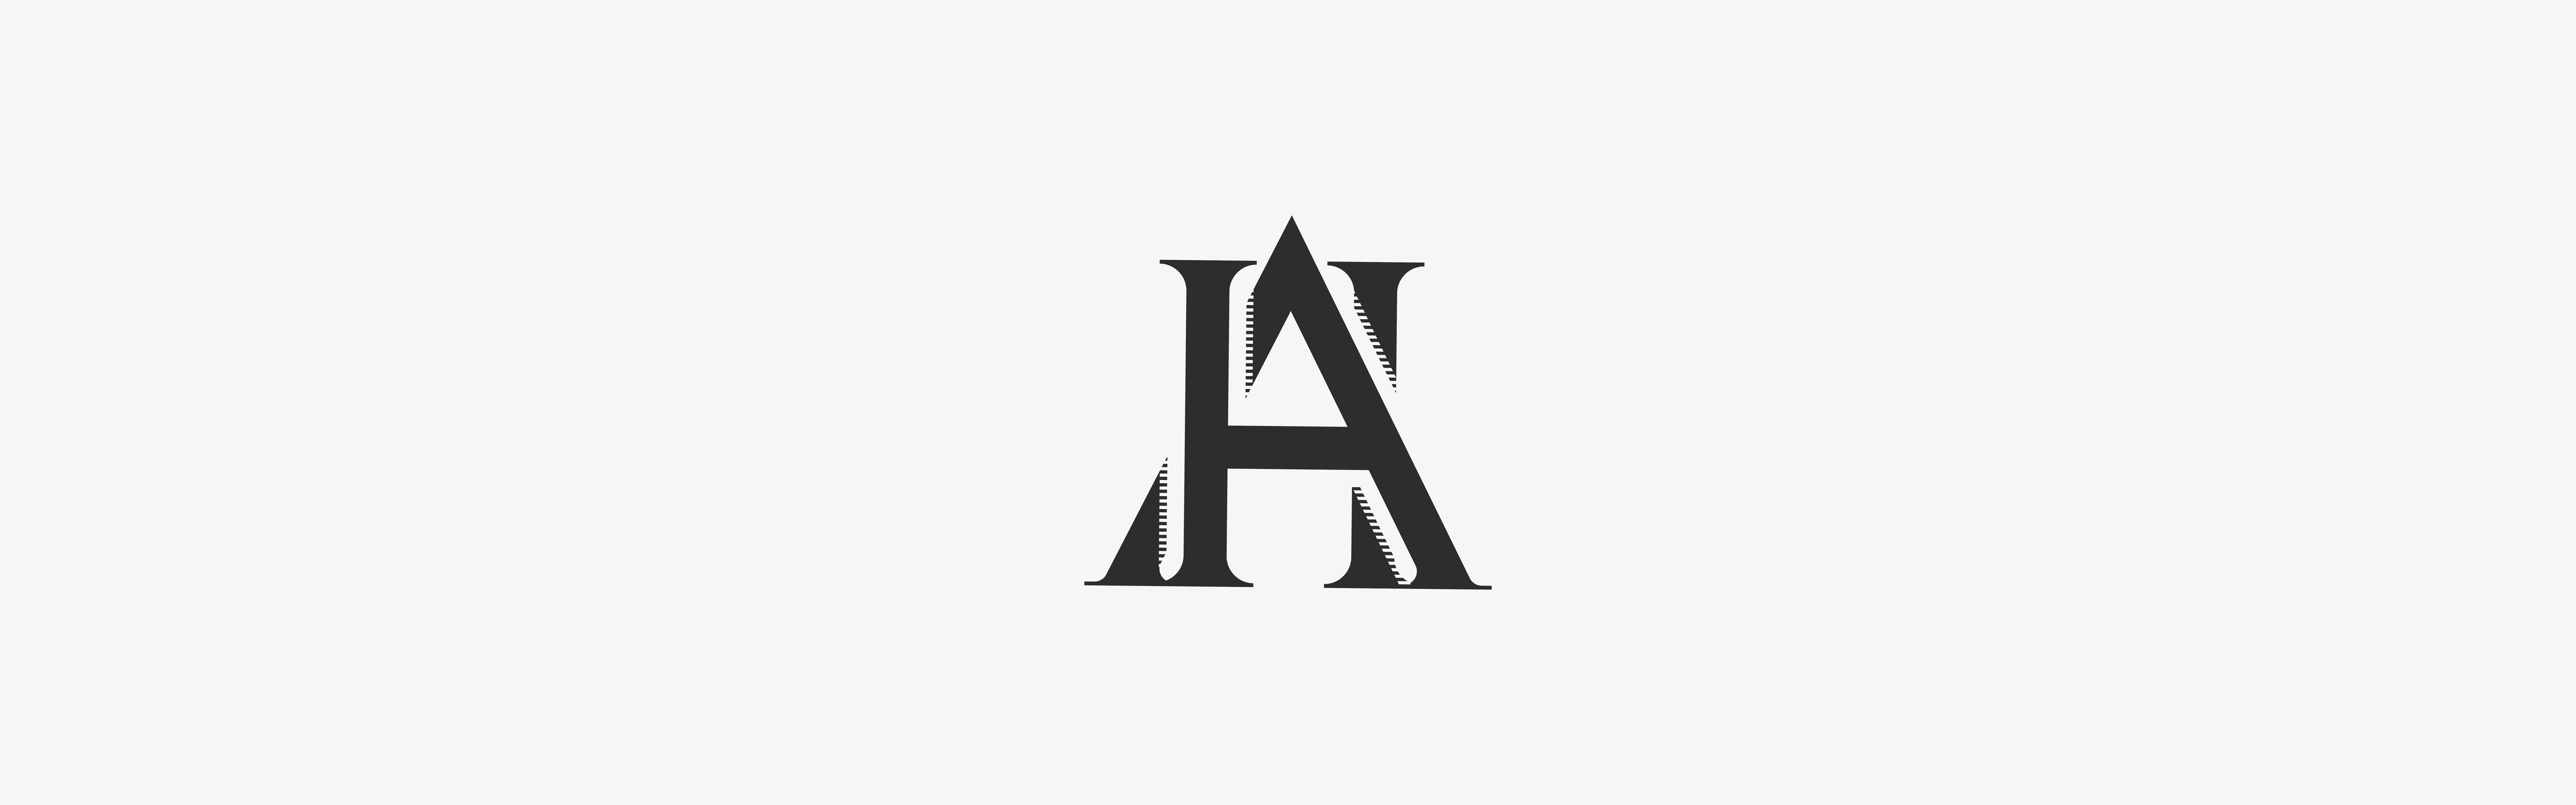 The image shows a stylized black letter "a" with elements resembling the Eiffel Tower and the Hotel Americano incorporated into its design.